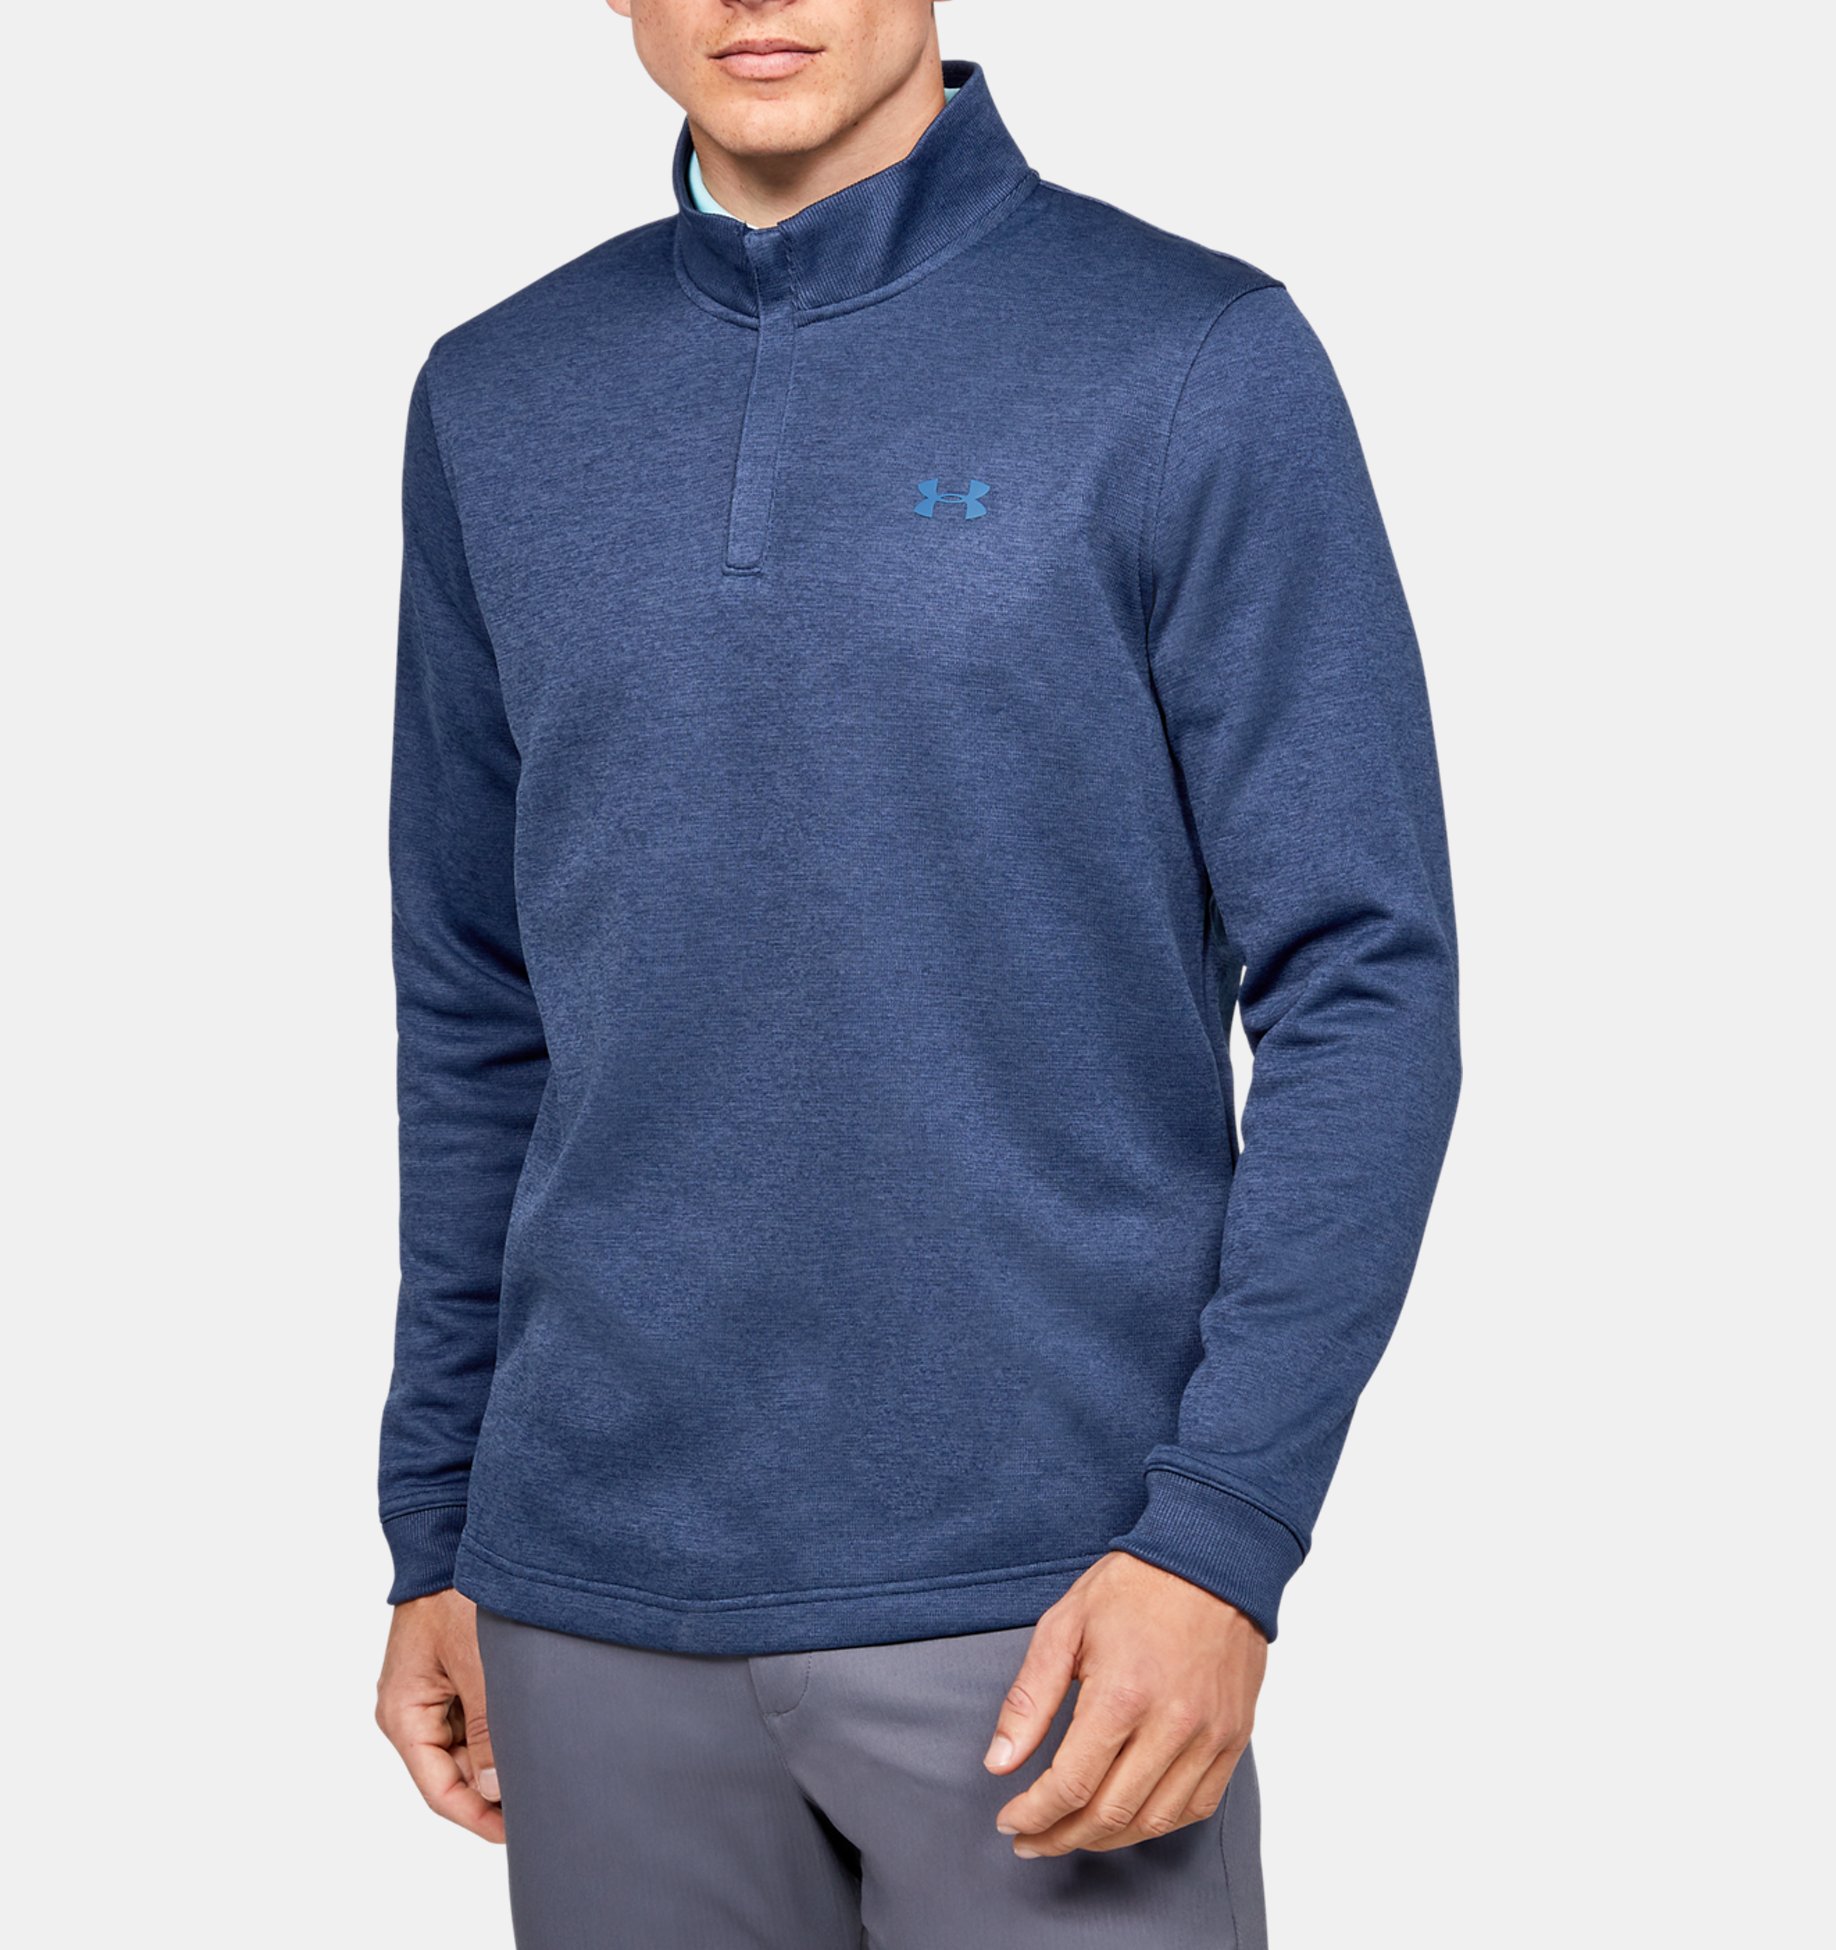 Shop Under Armour® – Up To 50% Off Select Styles